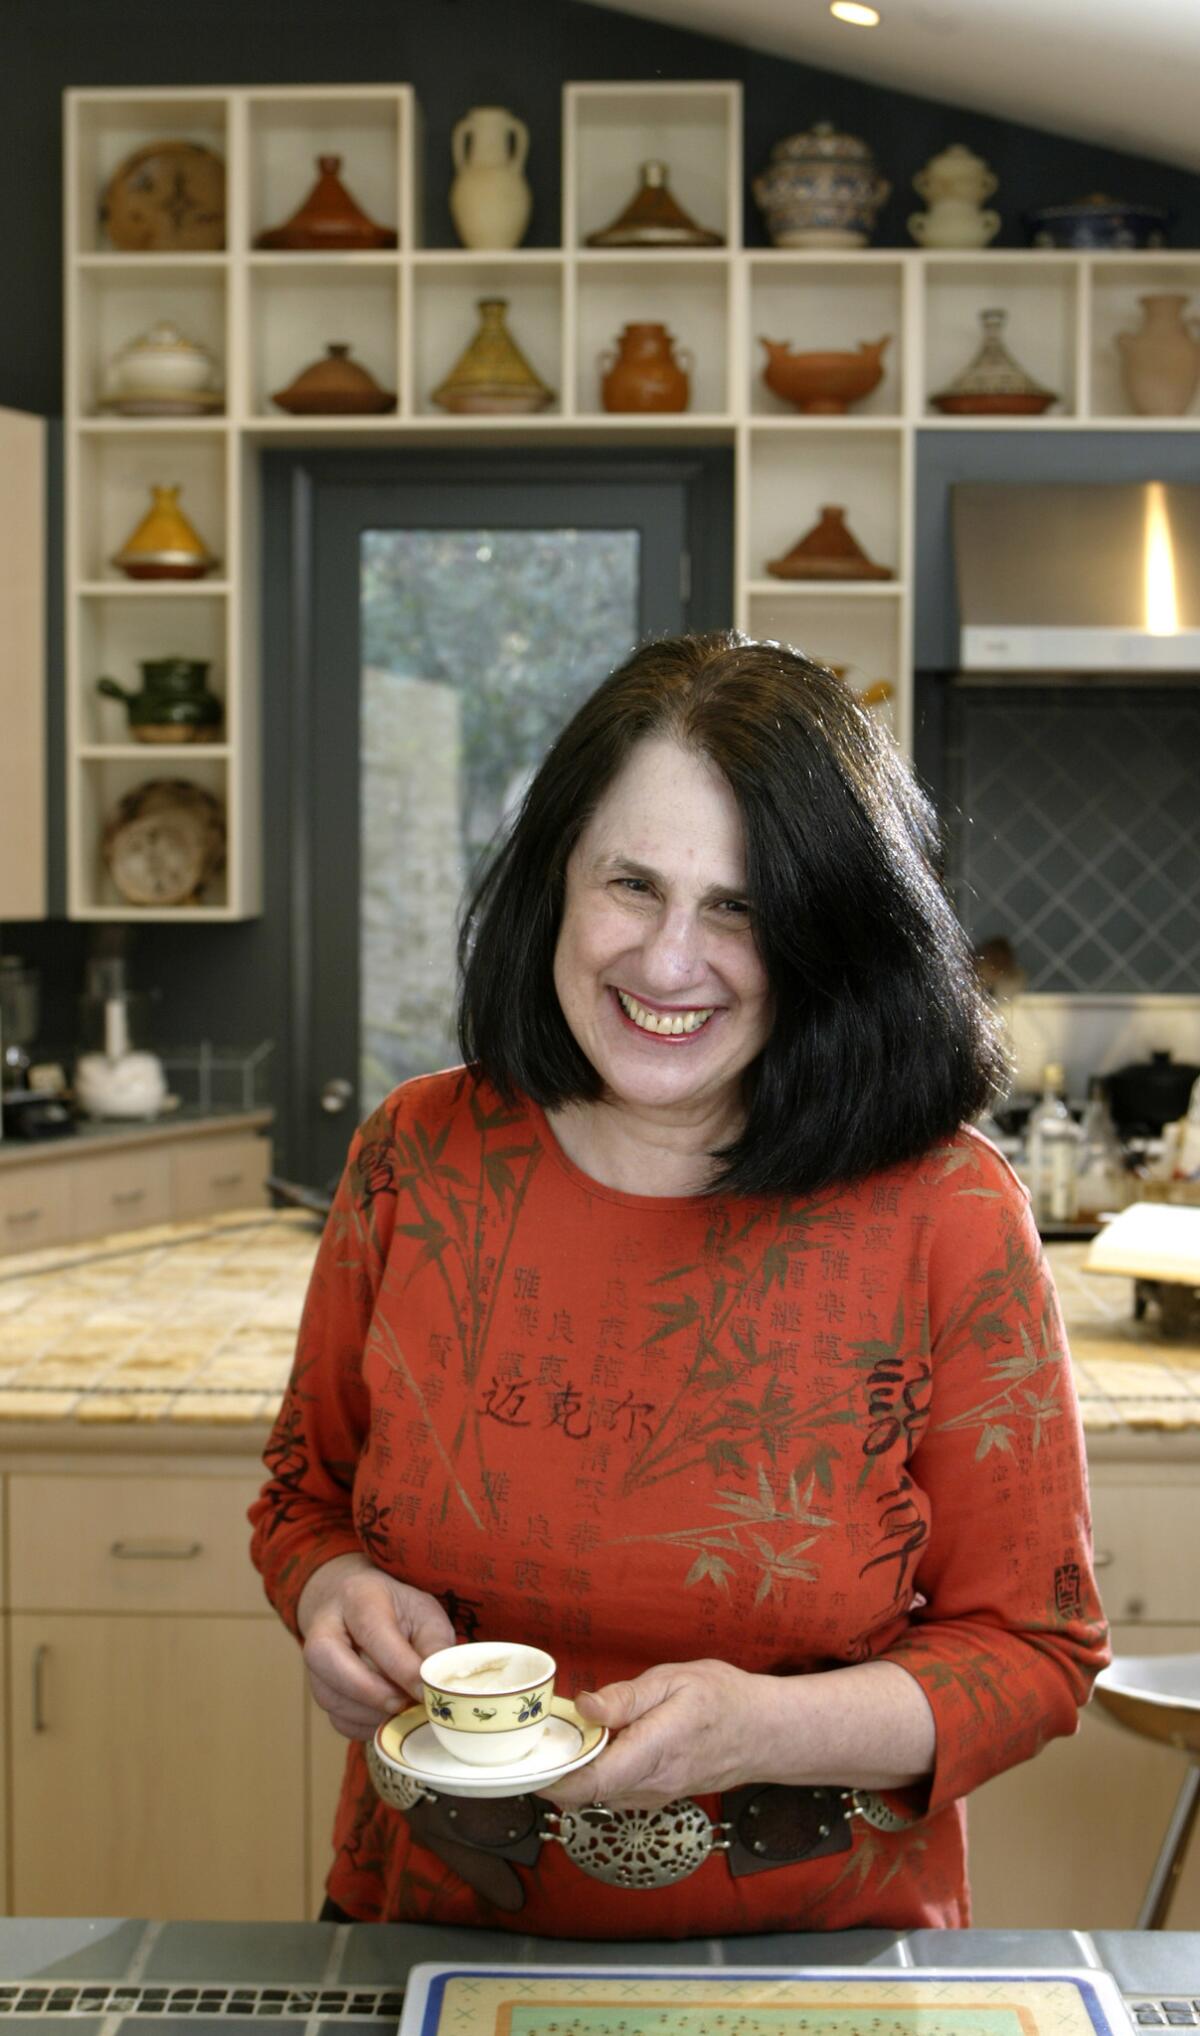 Paula Wolfert in her home kitchen with some of her favorite clay cooking pots.